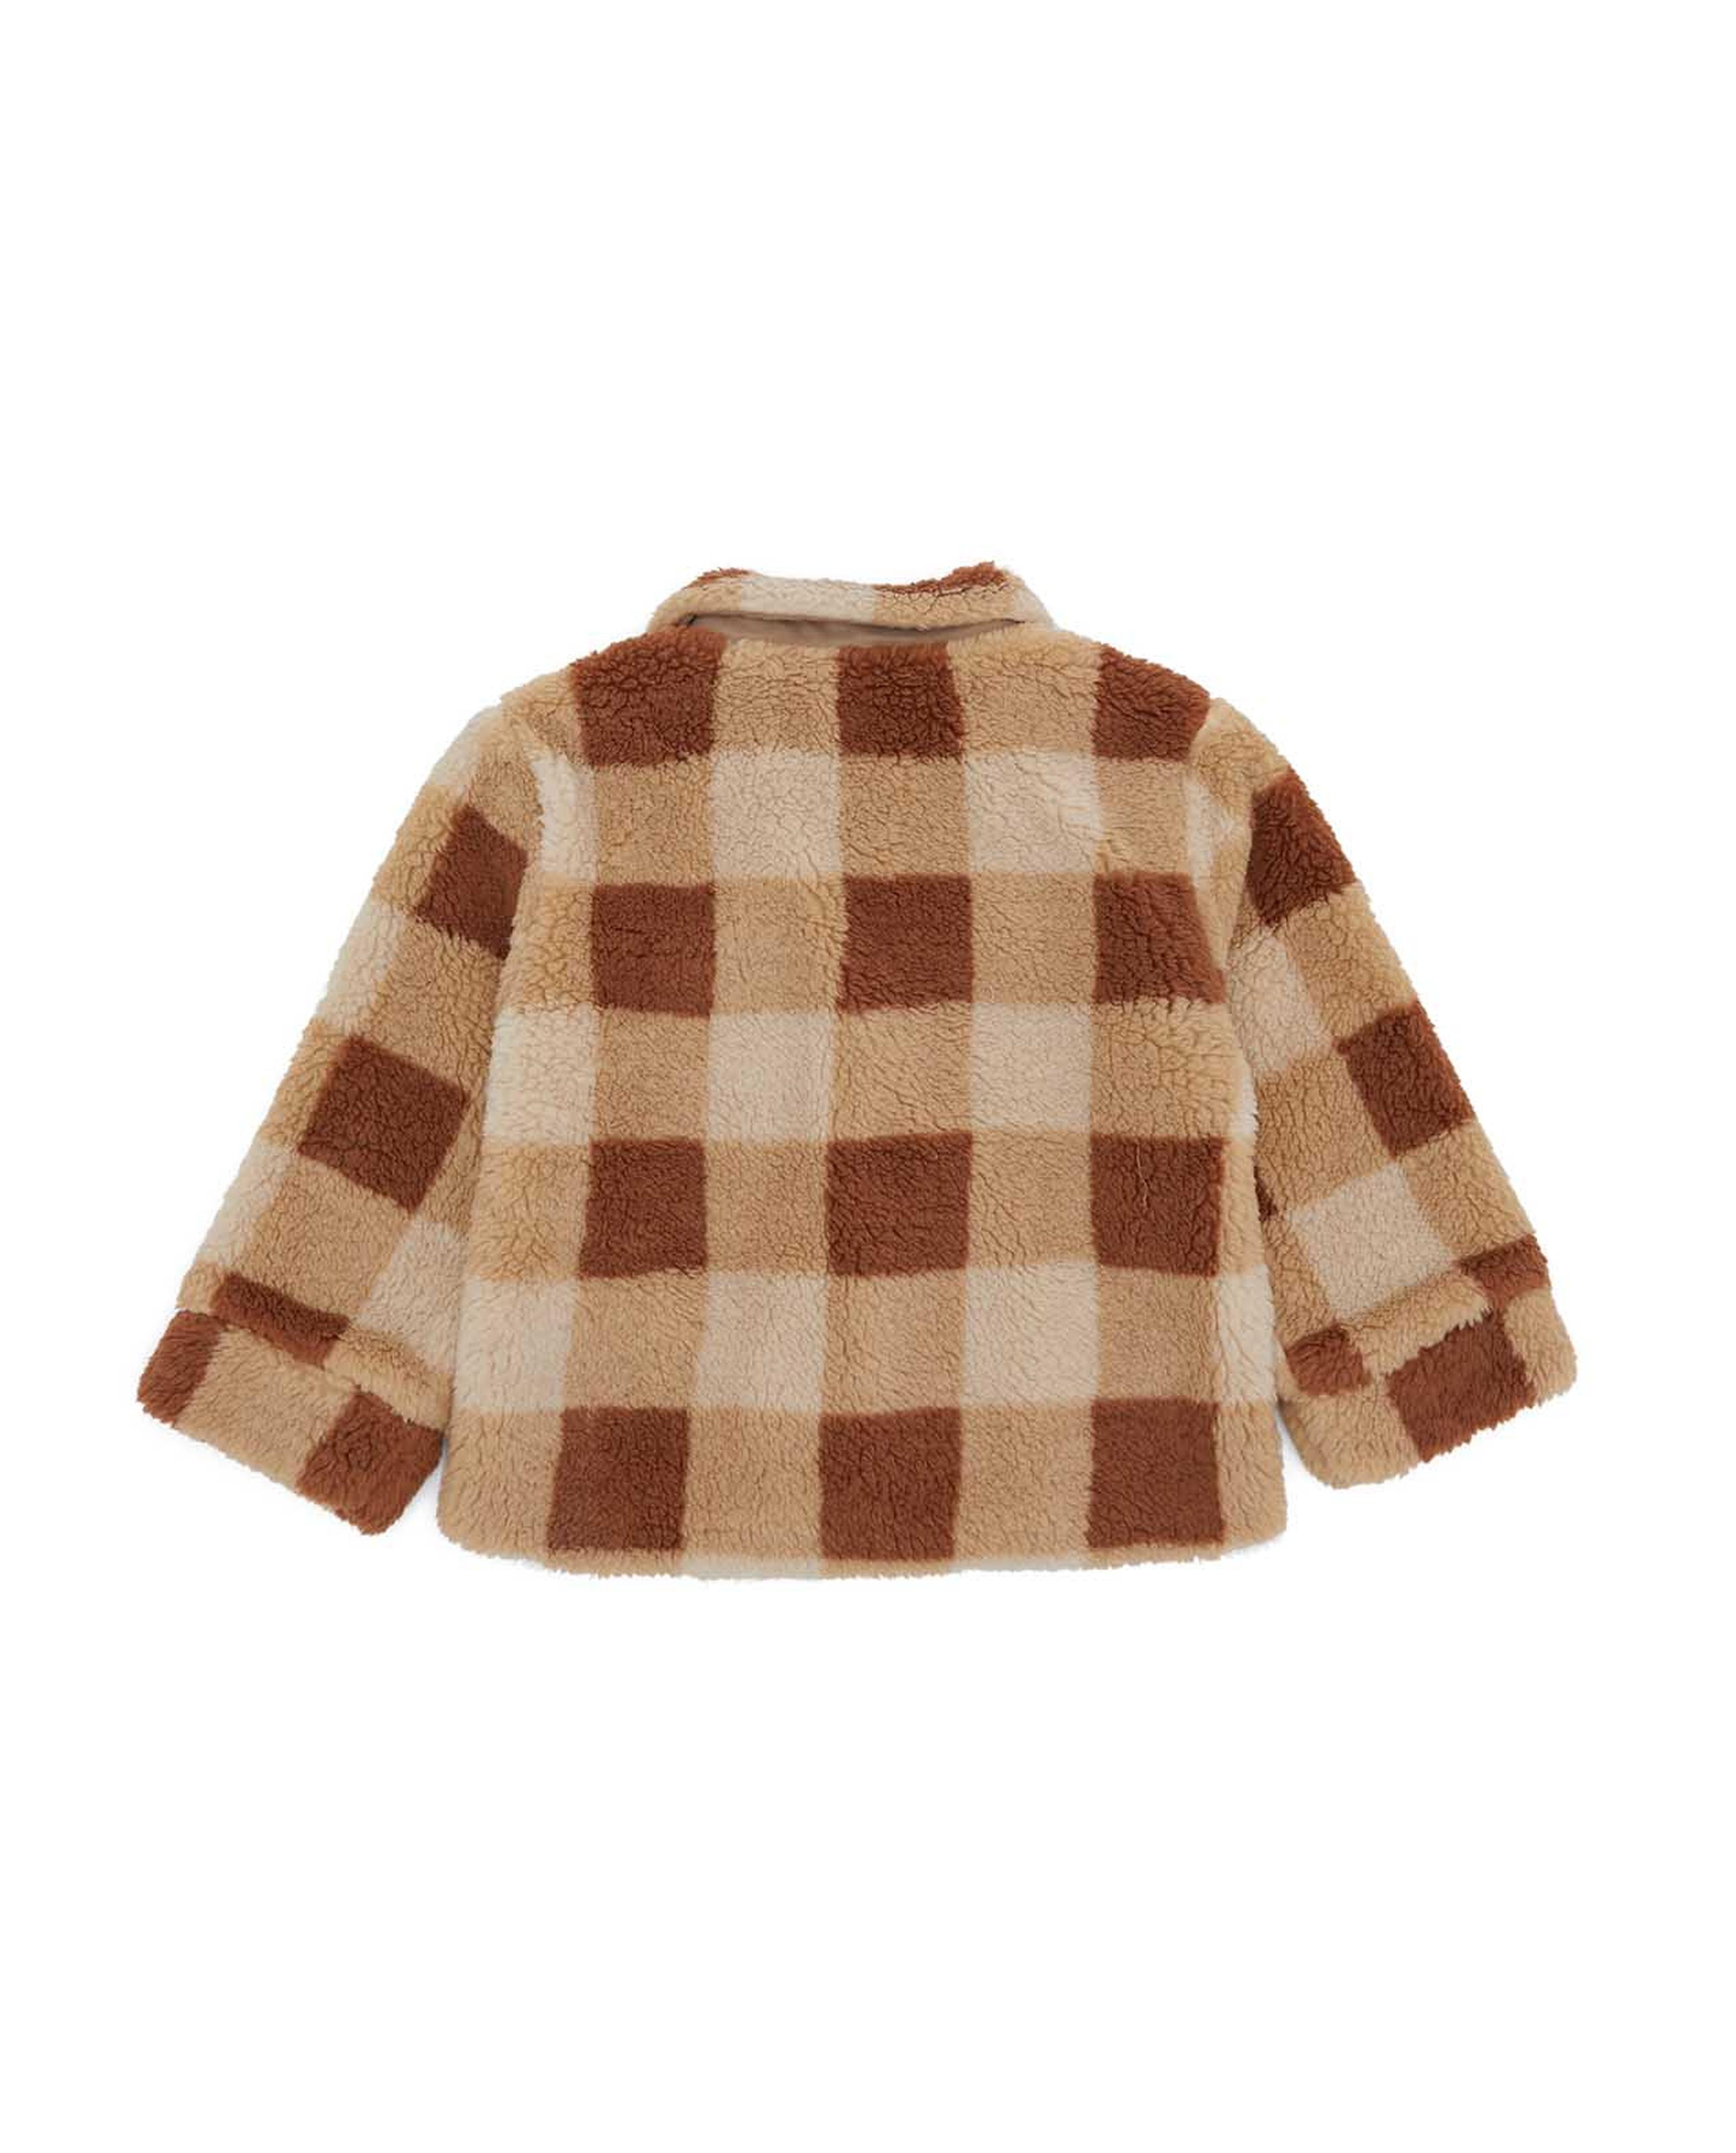 Checked Plush Jacket with Button Closure